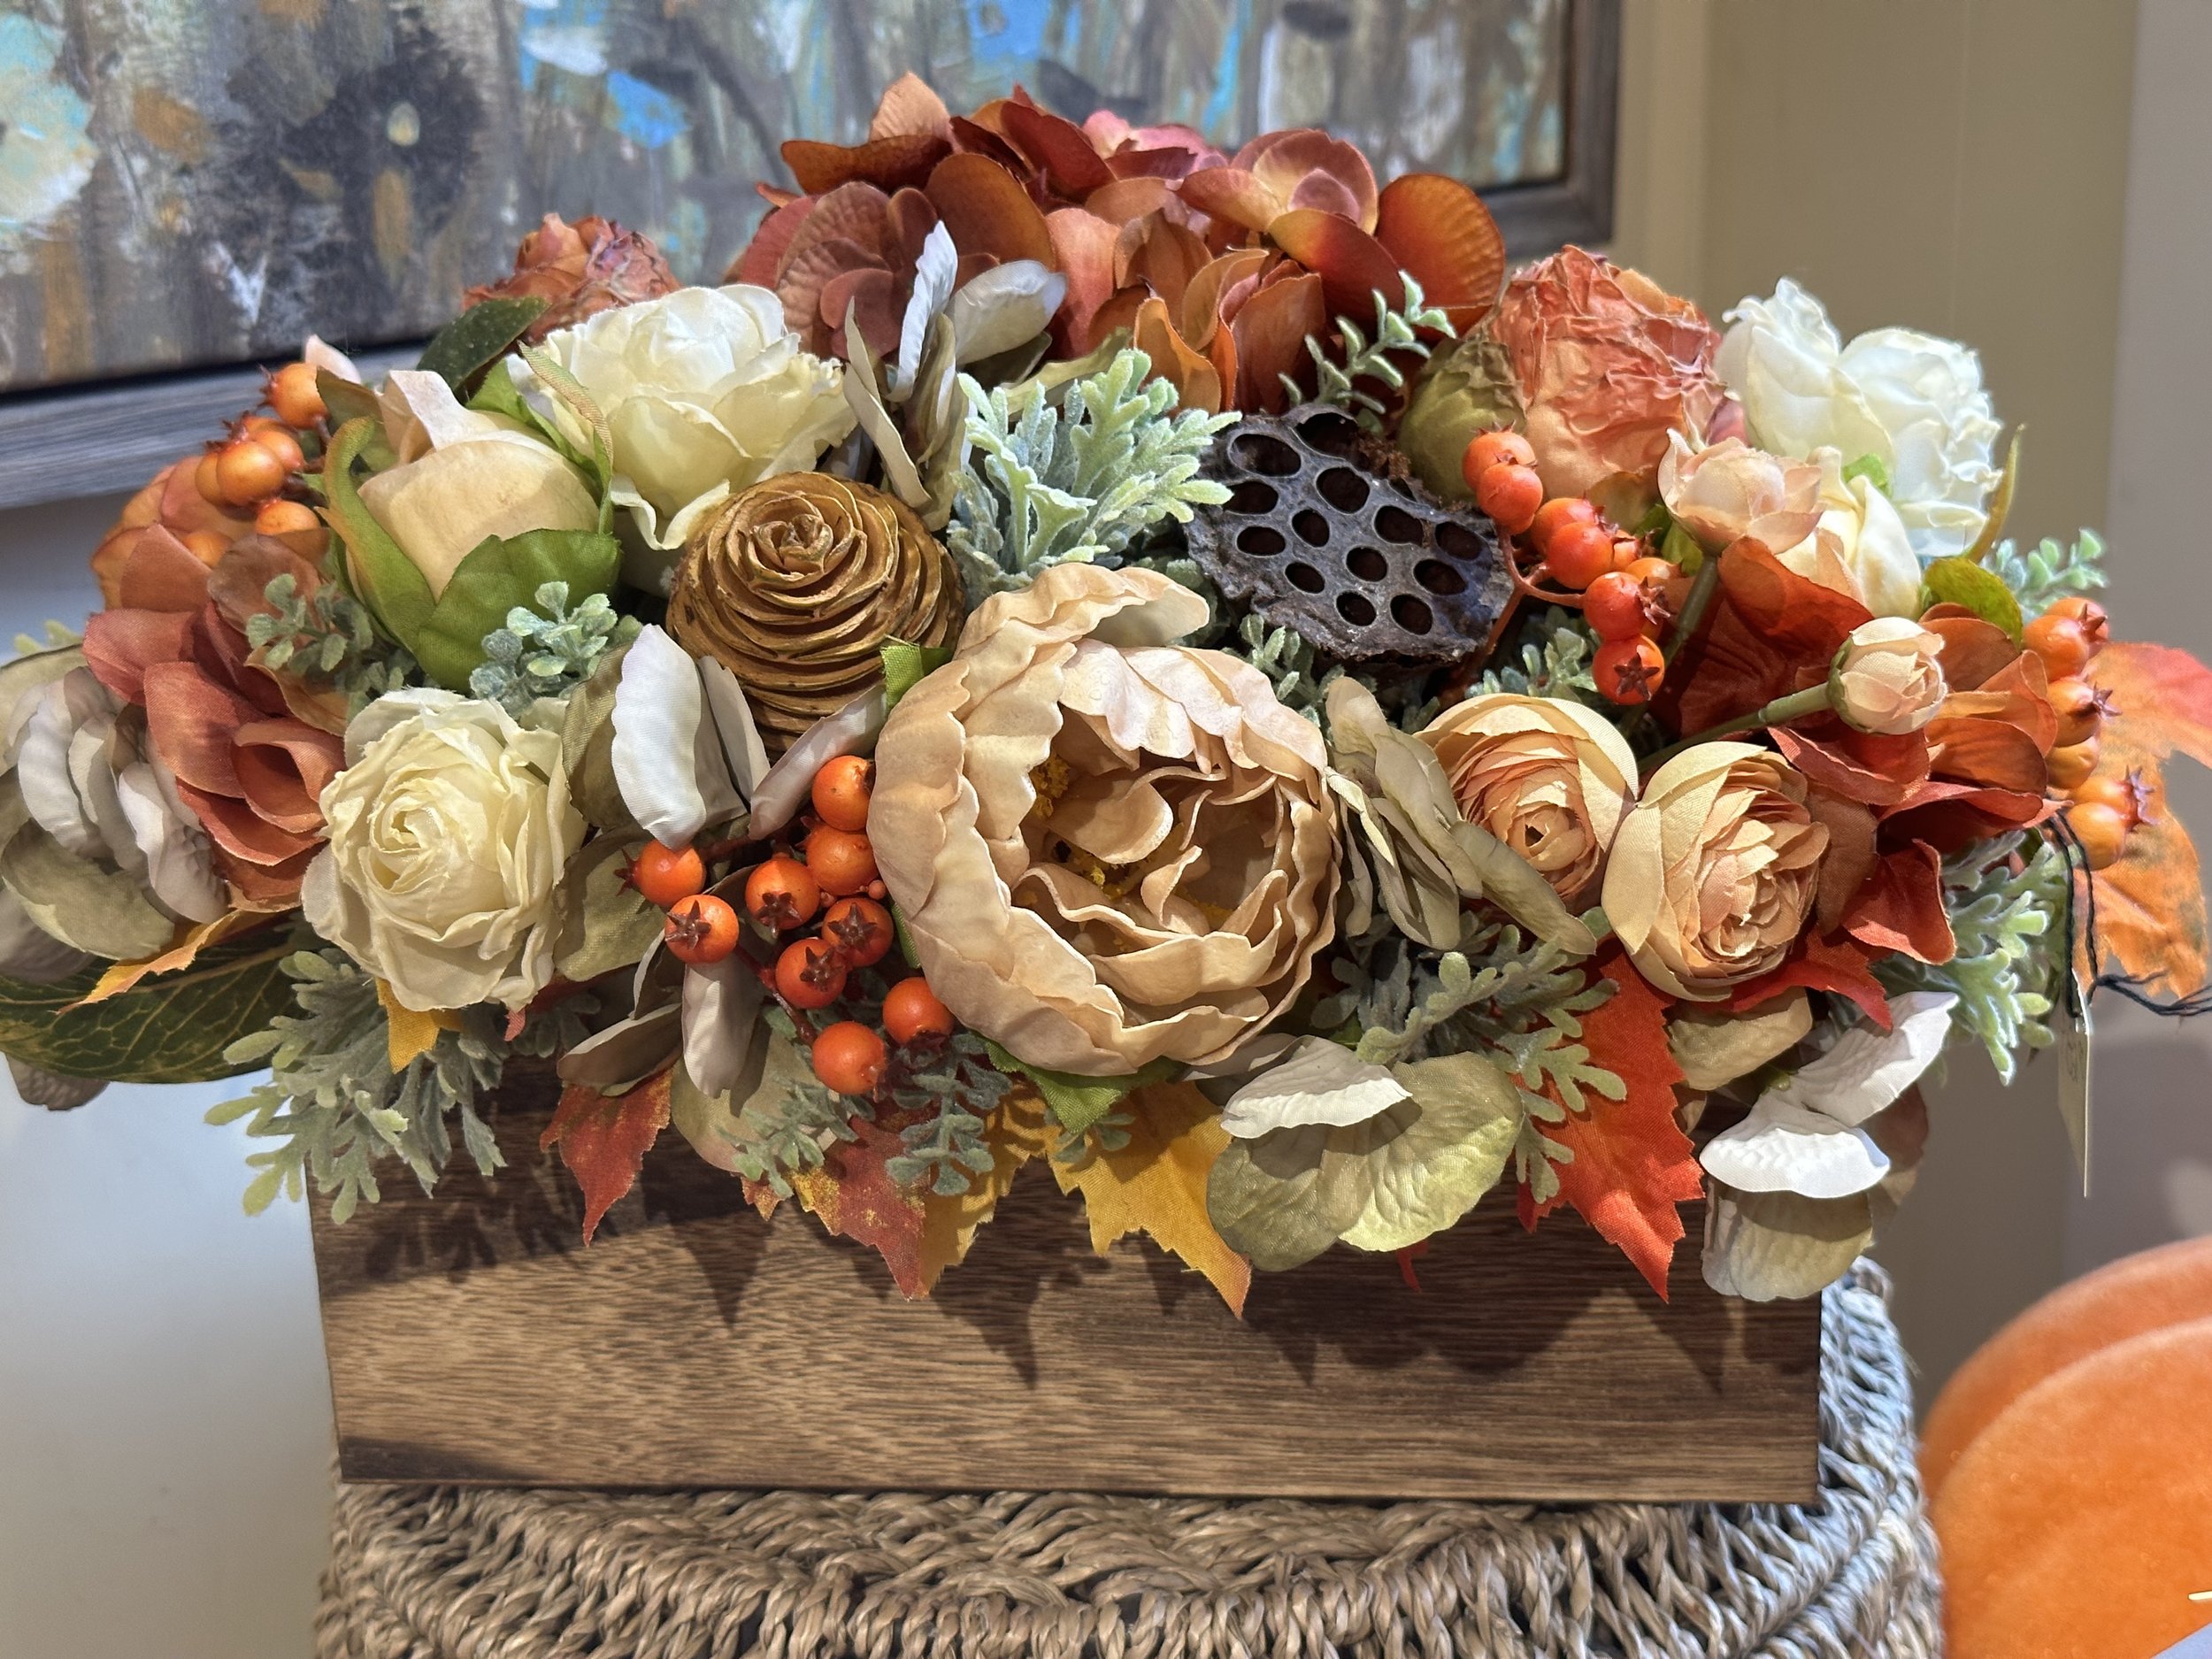 Locally Crafted Floral Arrangements 